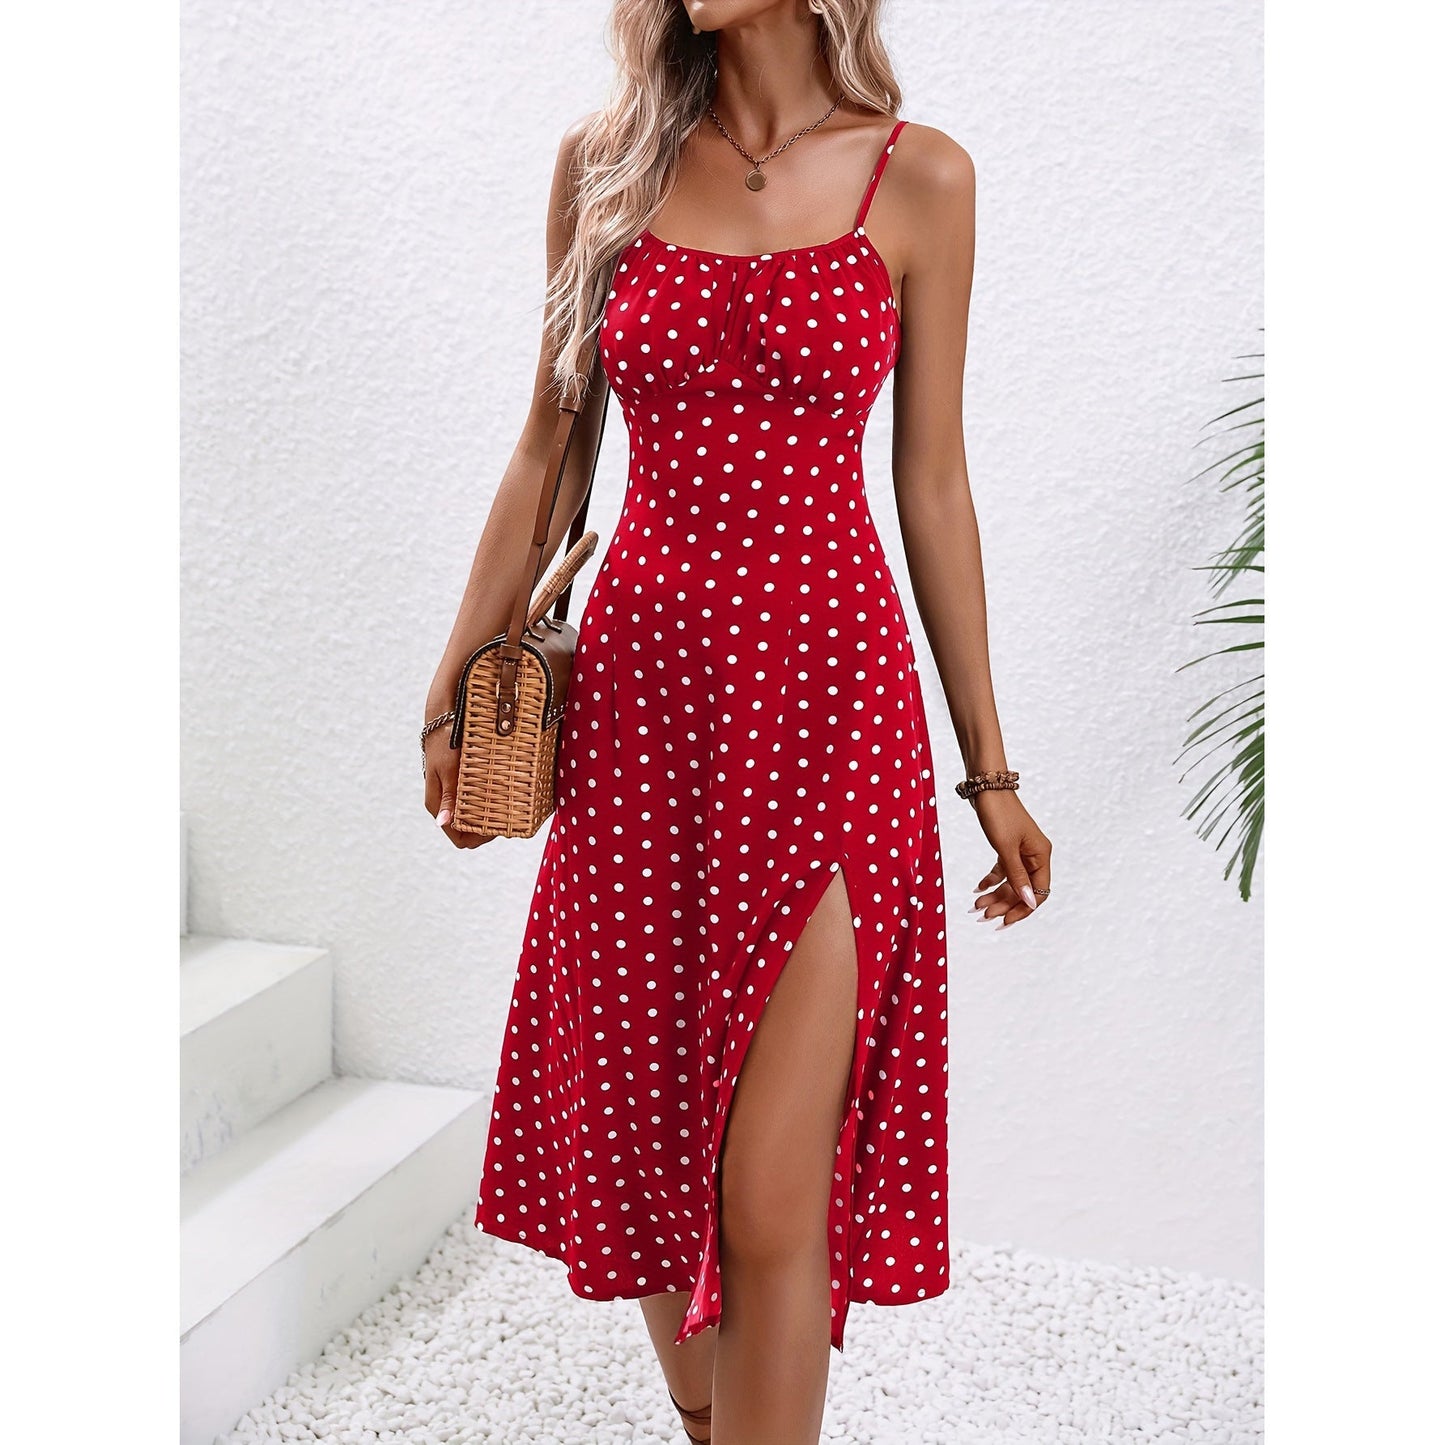 Polka Dot Print Maxi Dress with Sexy Slit and Suspender Straps